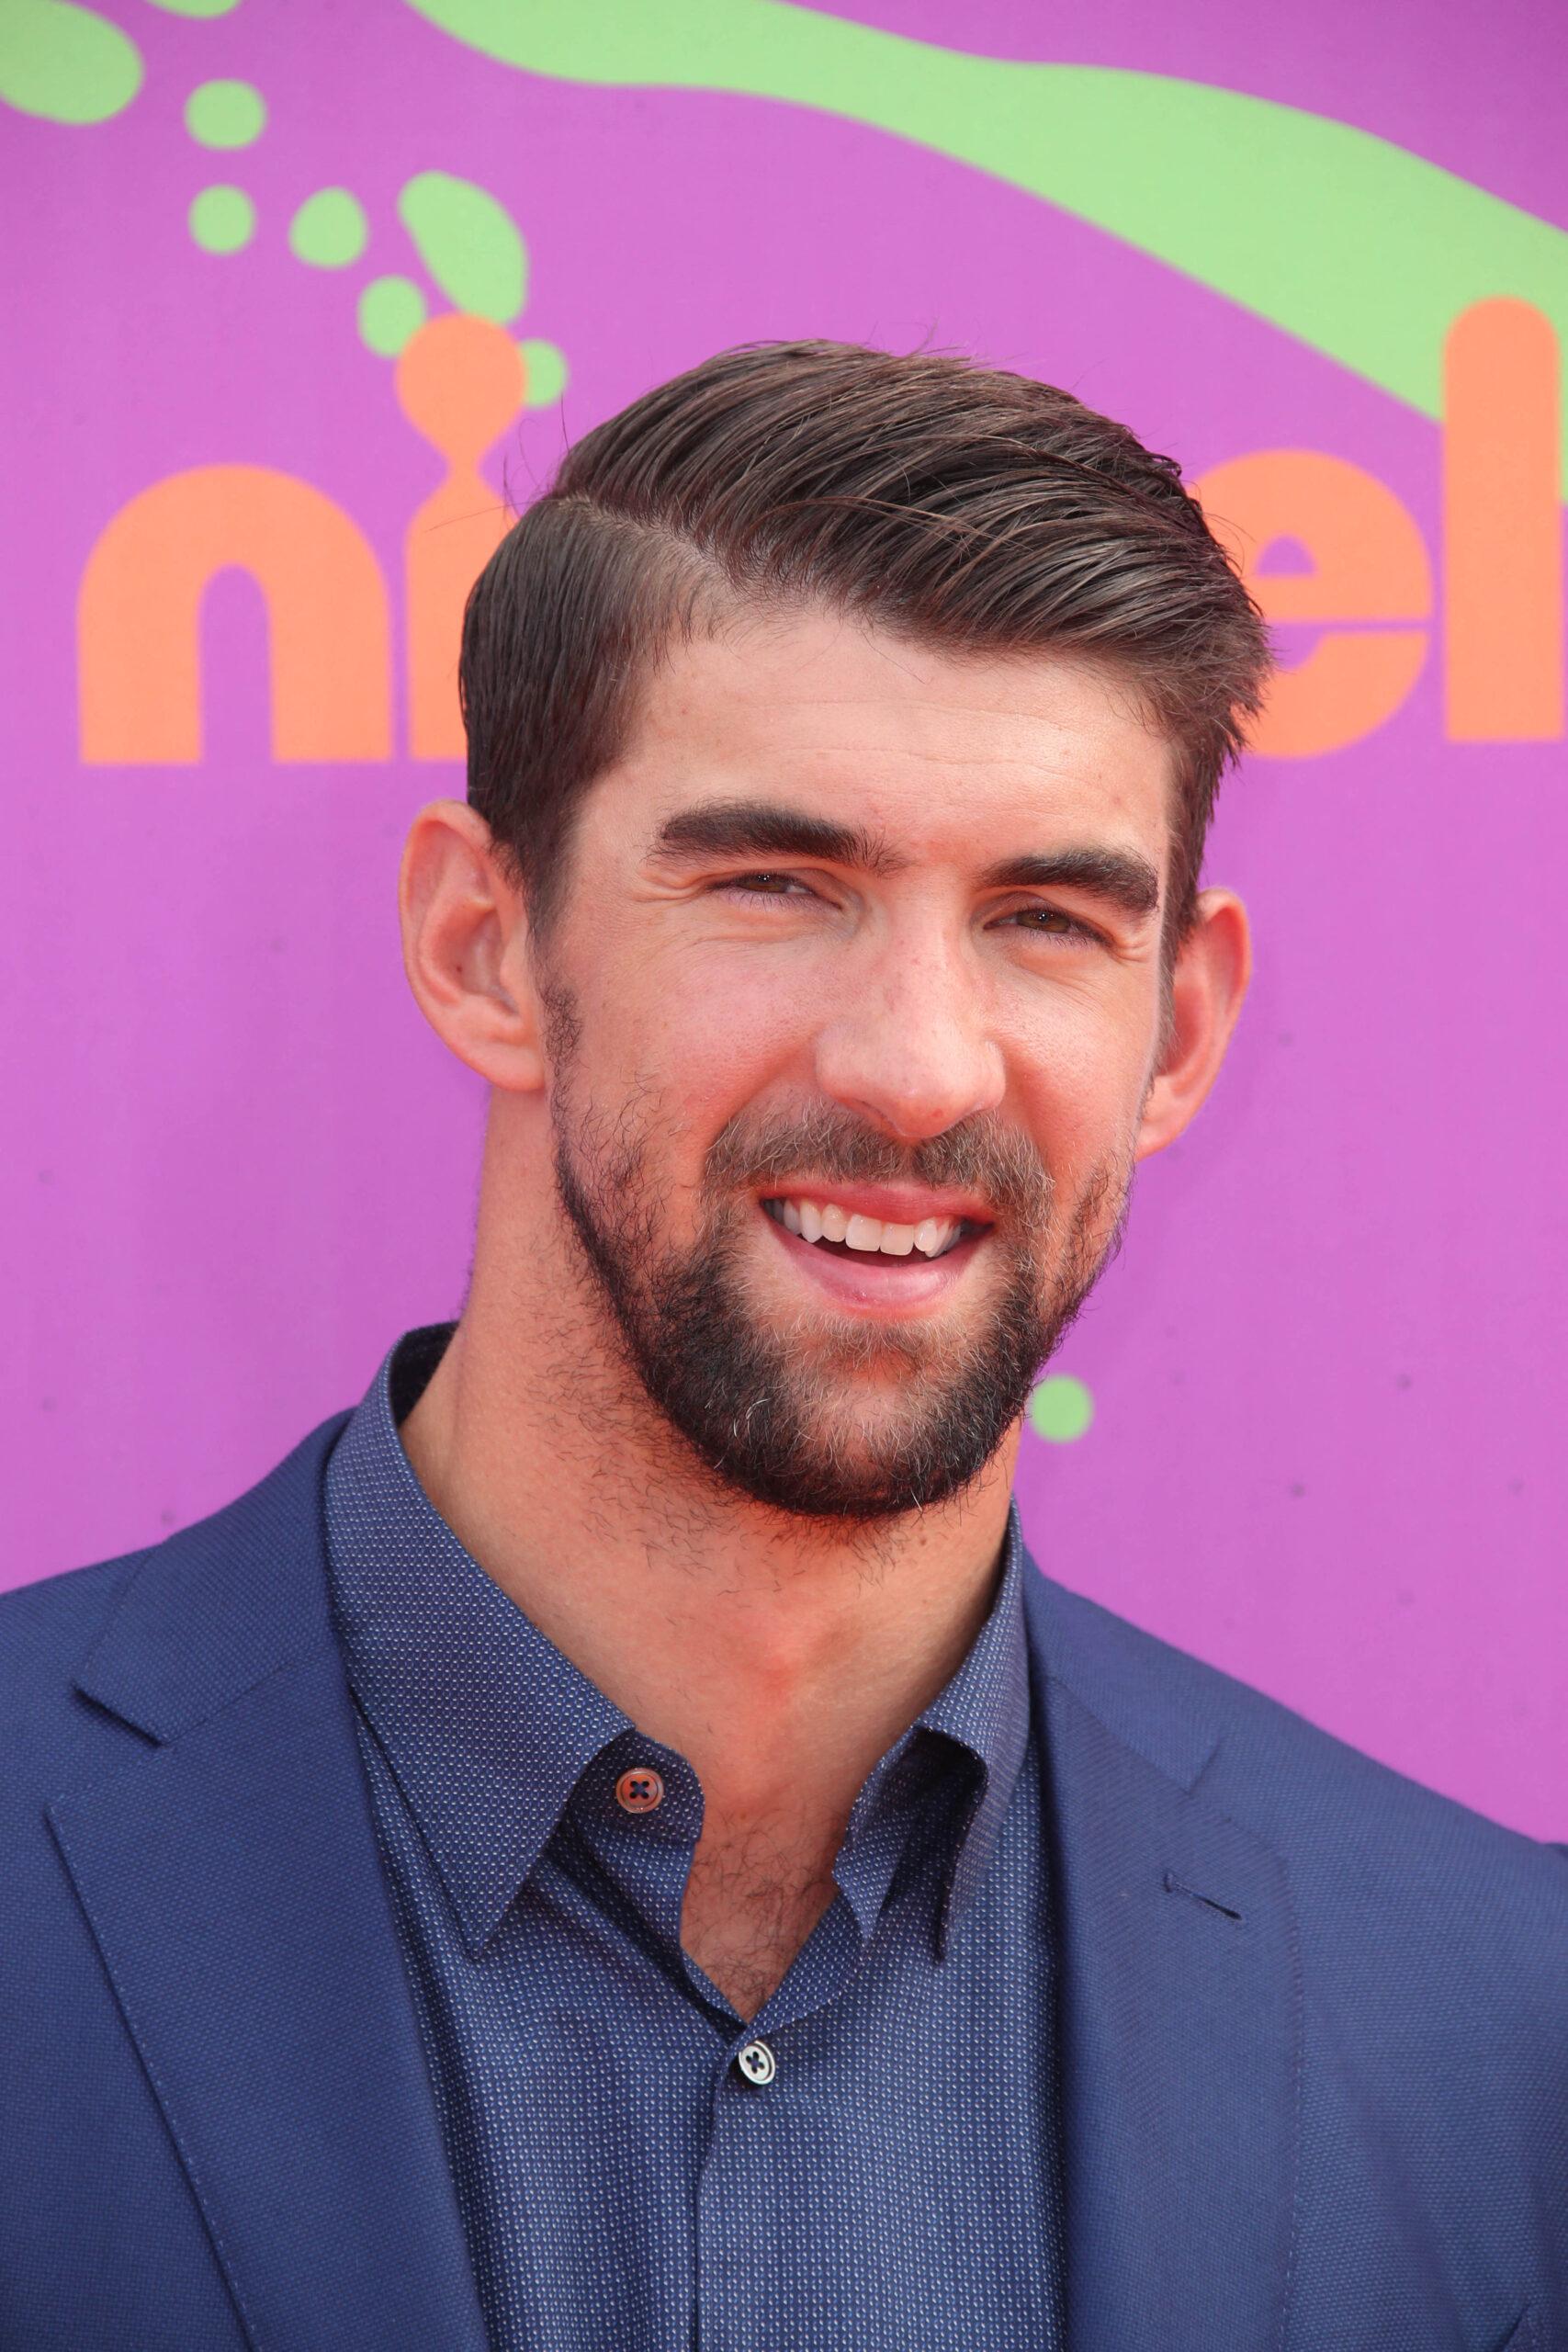 Michael Phelps arrives at the Nickelodeon Kids' Choice Sports Awards in Los Angeles